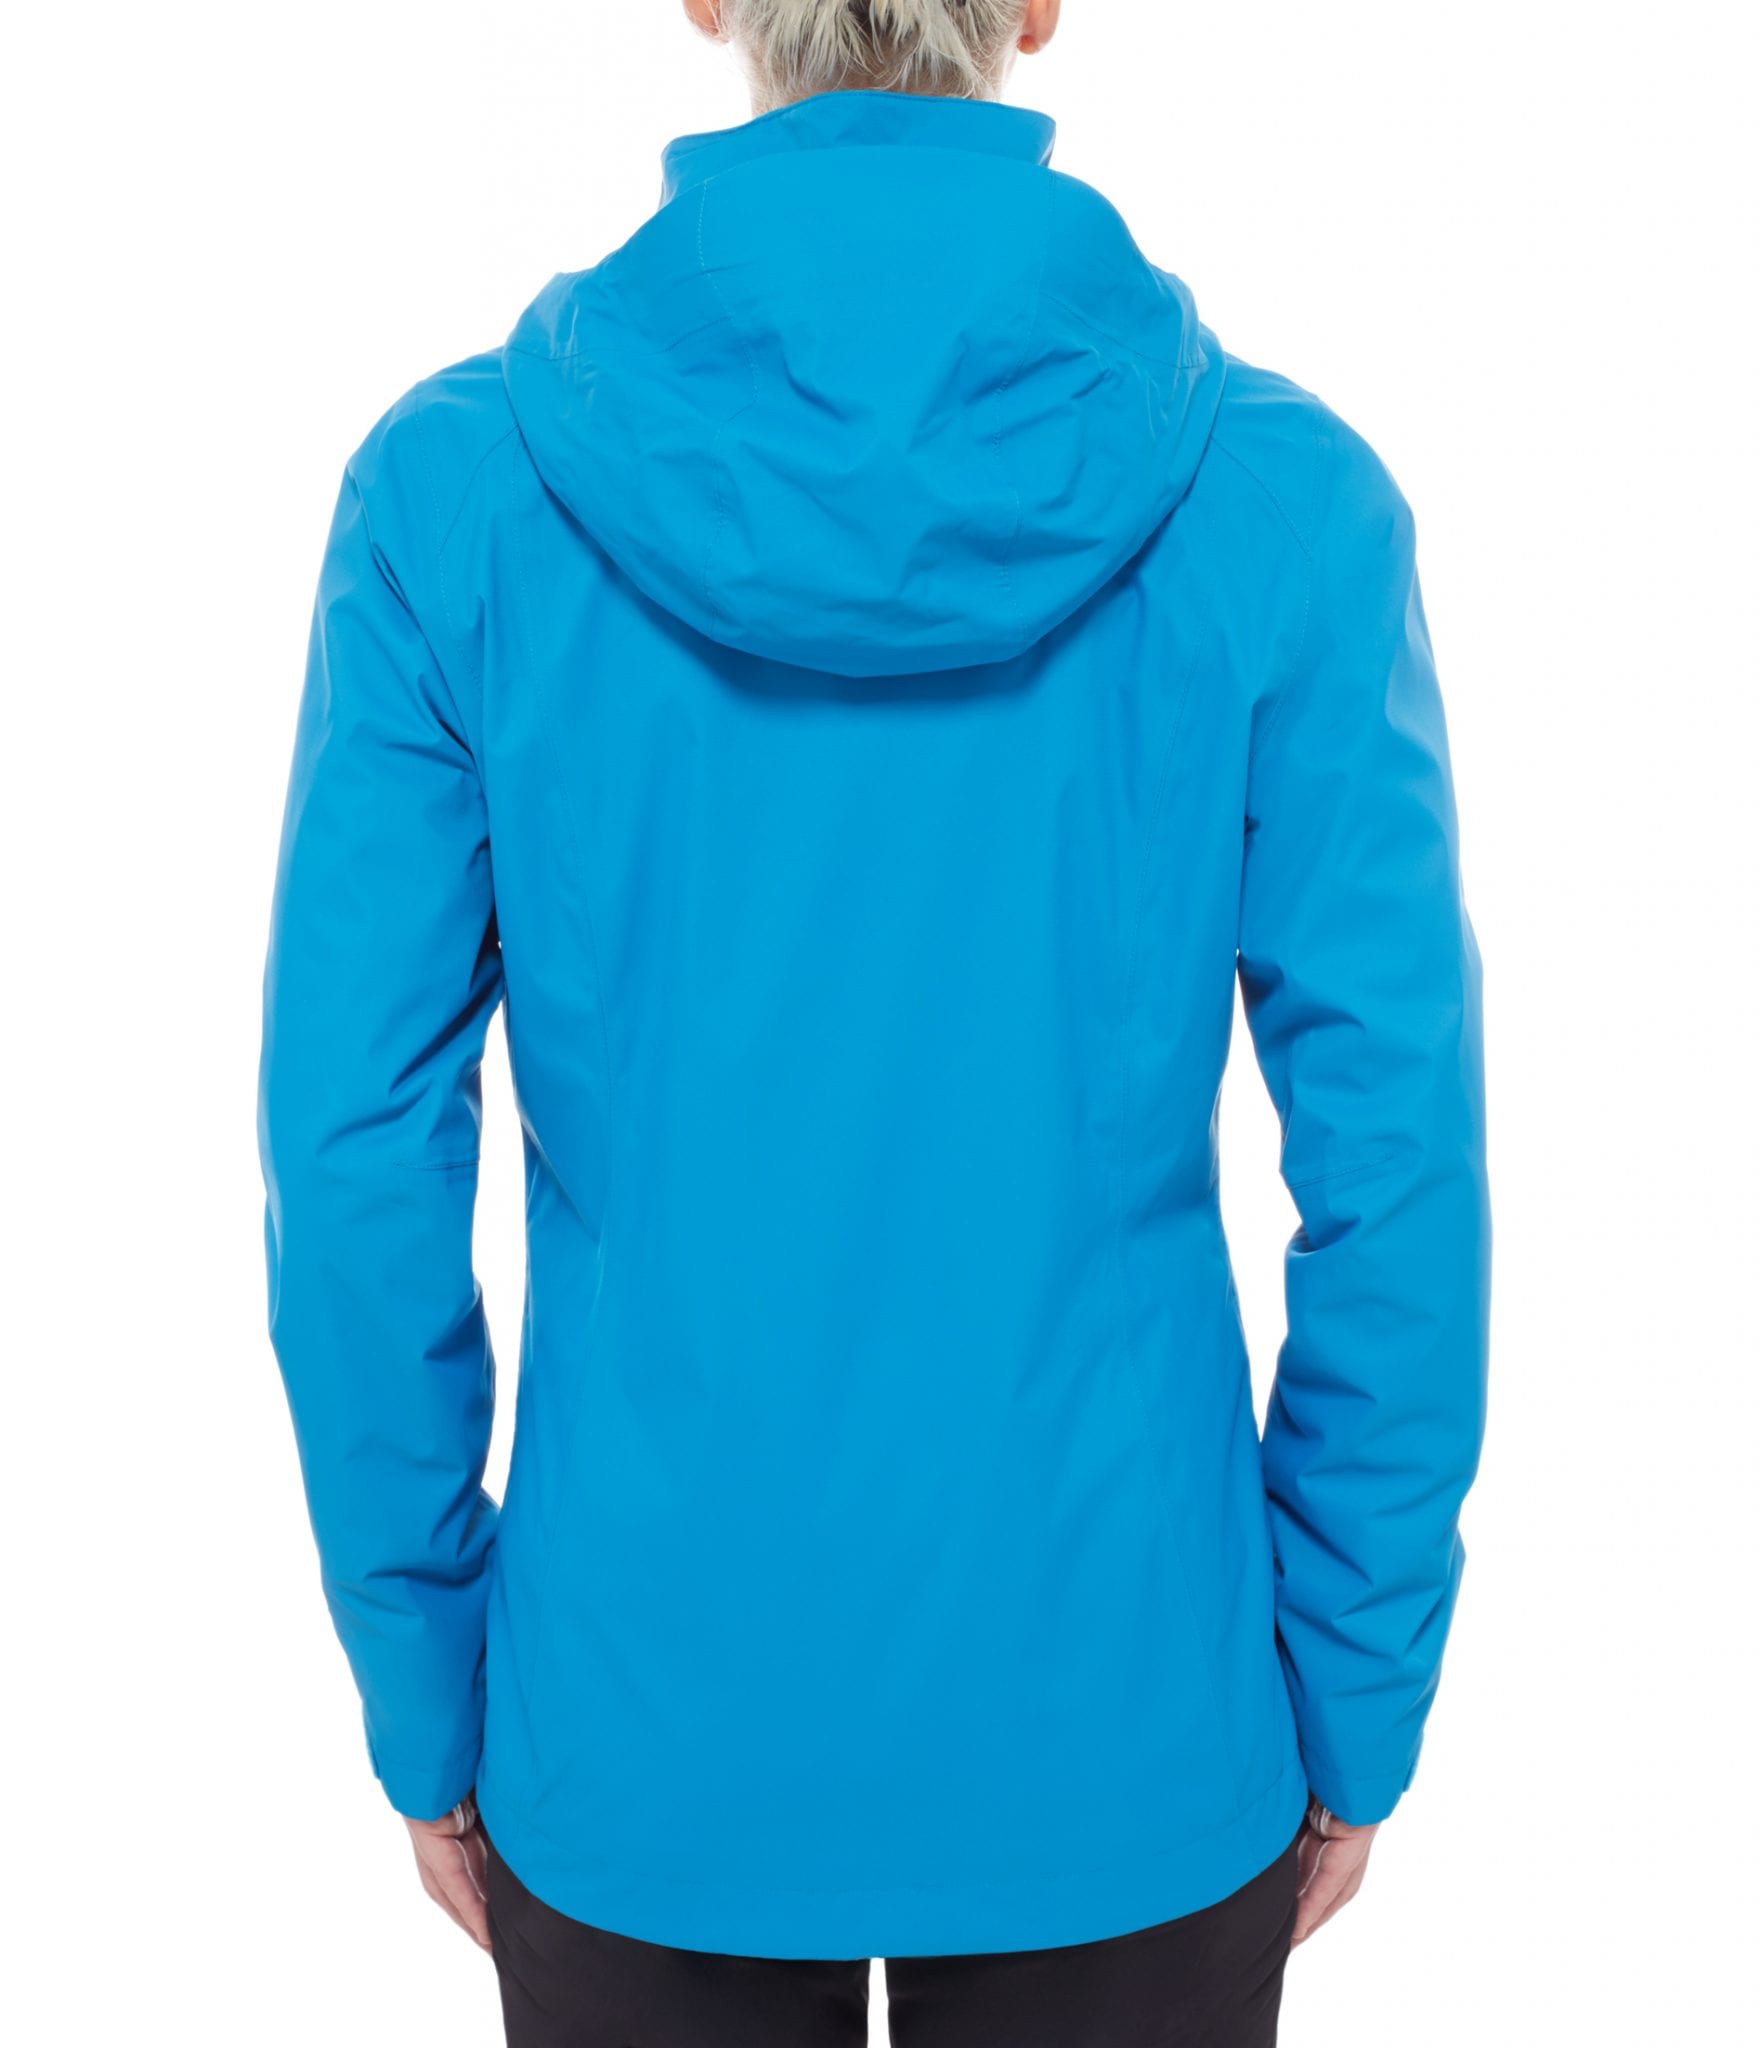 The North | shop triclimate o-zone : Face Evolve Danish W – jacket blue II